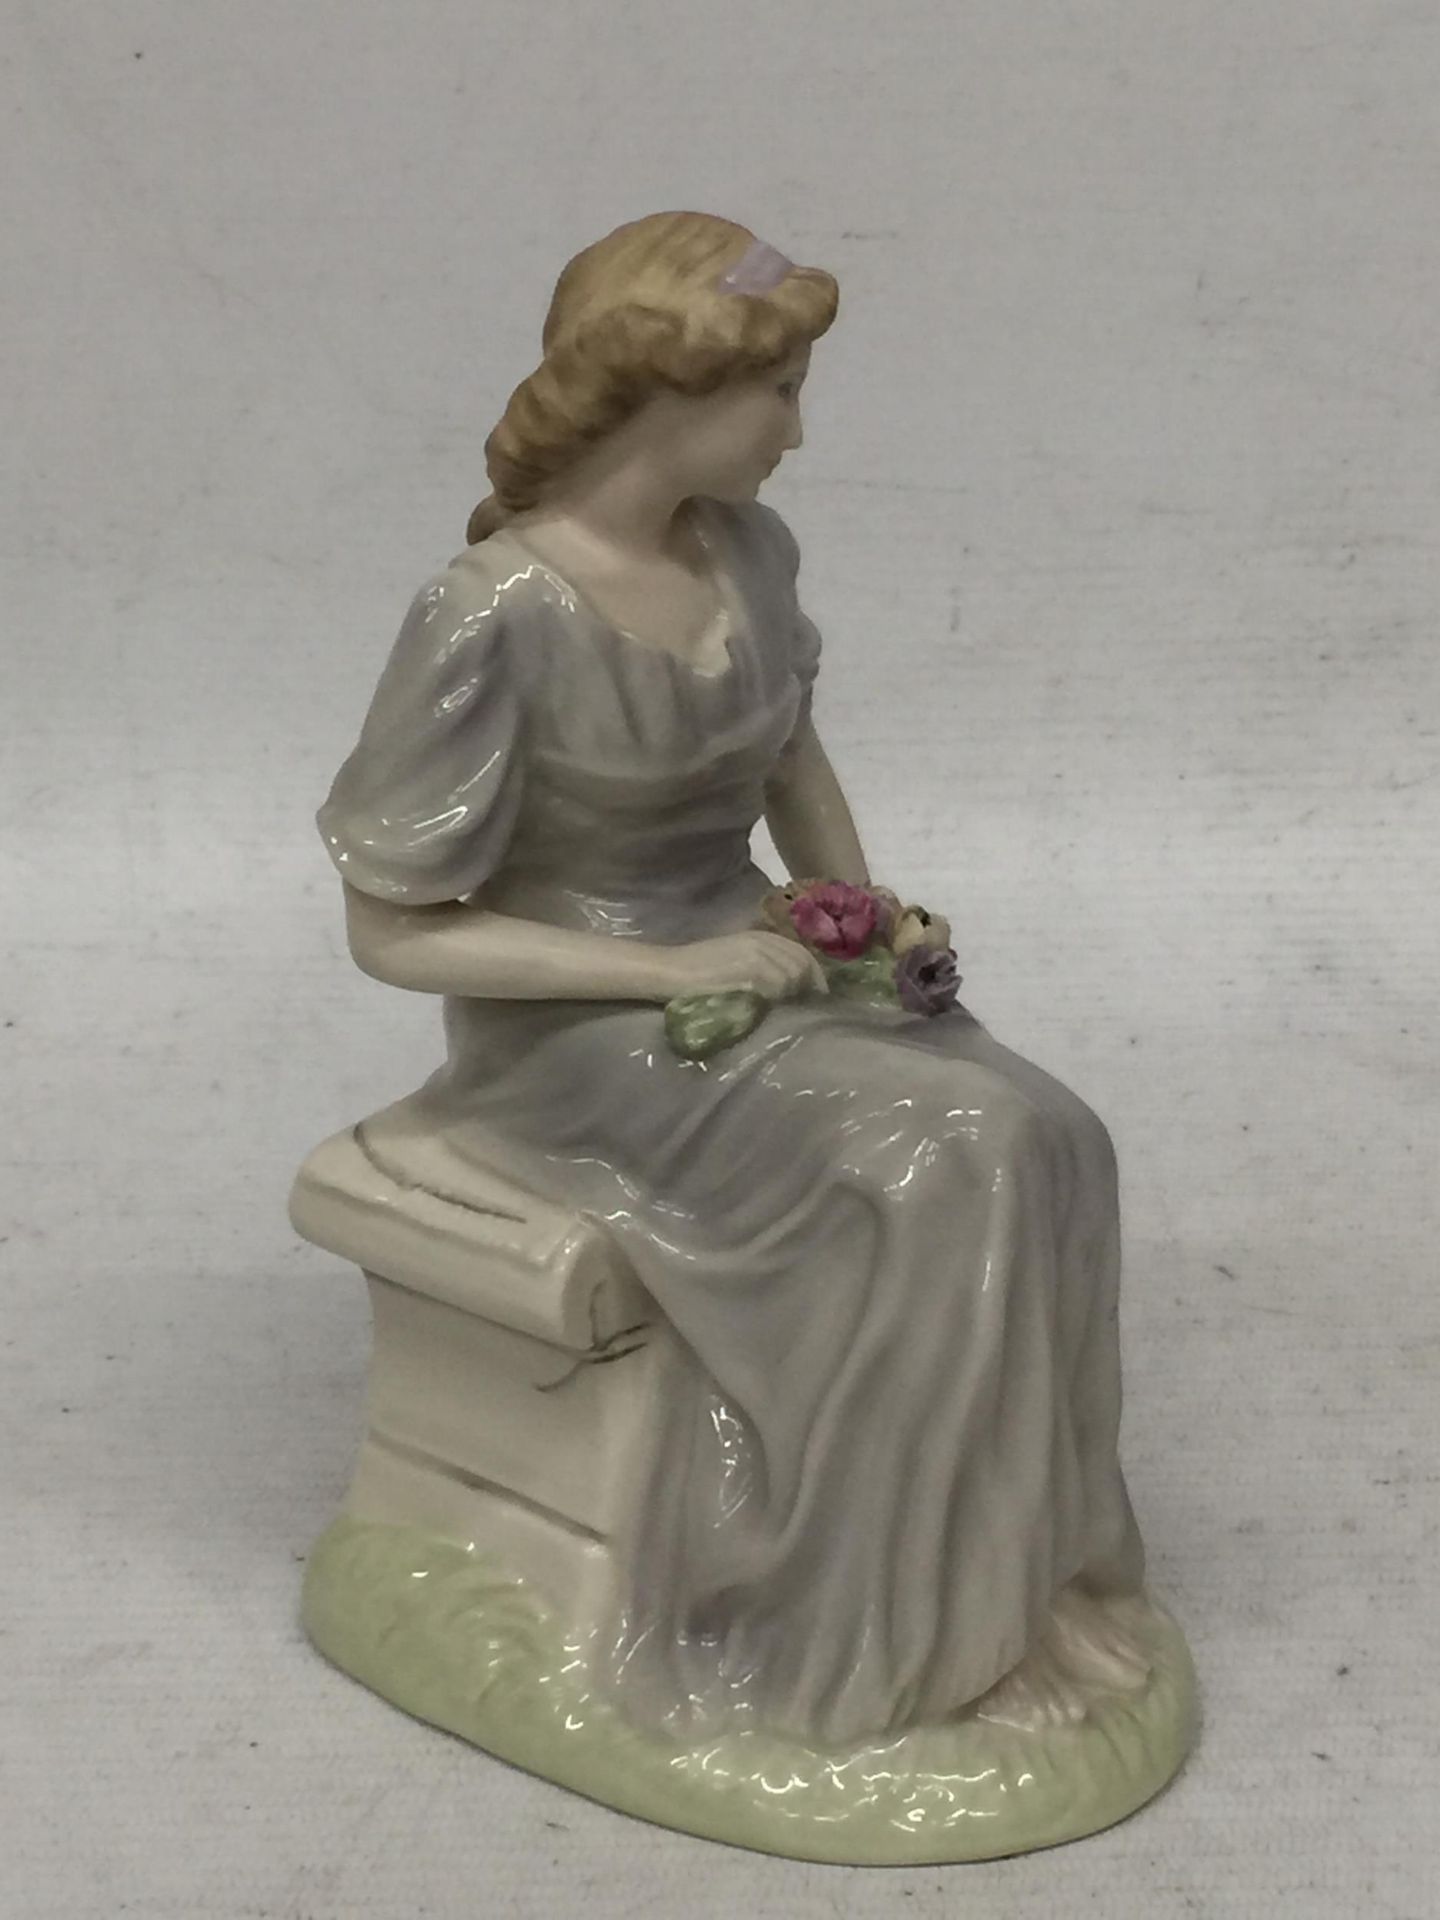 A WEDGWOOD THE CLASSICAL COLLECTION 'TRANQUILITY' FIGURE - Image 4 of 5